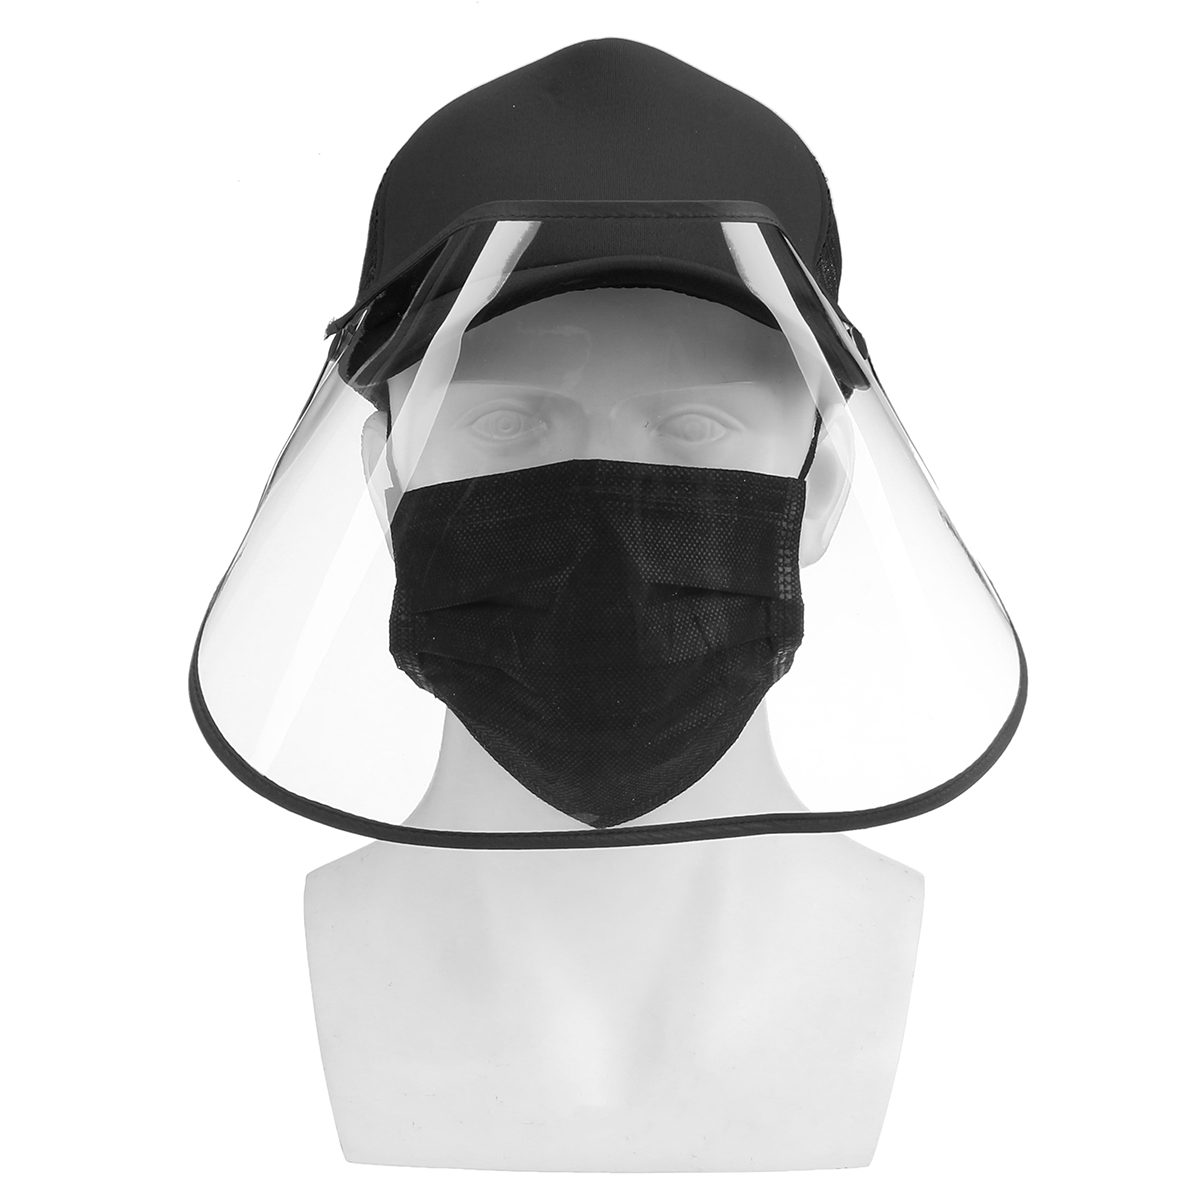 Protective-Cap-Hat-Cover-Safe-Prevent-Droplet-Splash-Proof-Outdoor-Anti-spitting-1660356-6